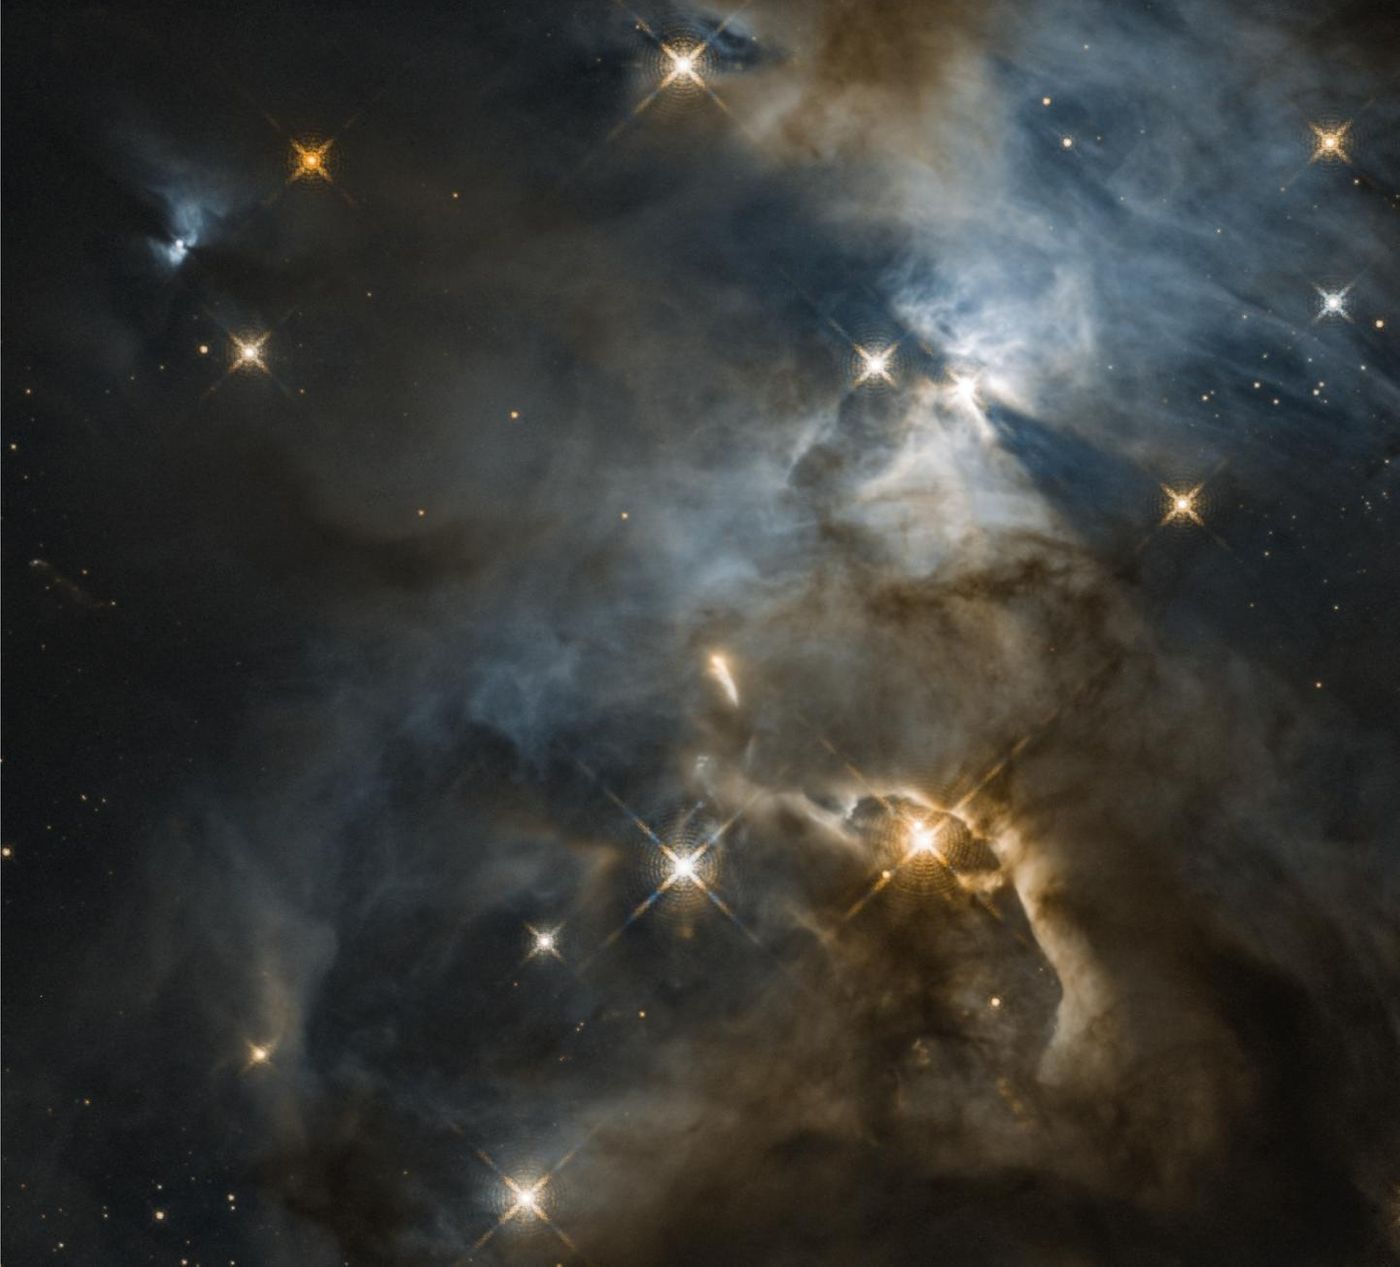 Astronomers using Hubble previously captured a remarkable image of a young star's unseen, planet-forming disk casting a huge shadow across a more distant cloud in a star-forming region. The star is called HBC 672, and the shadow feature was nicknamed the "Bat Shadow" because it resembles a pair of wings. The nickname turned out to be unexpectedly appropriate, because now those "wings" appear to be flapping! / Credit: NASA, ESA, and STScI